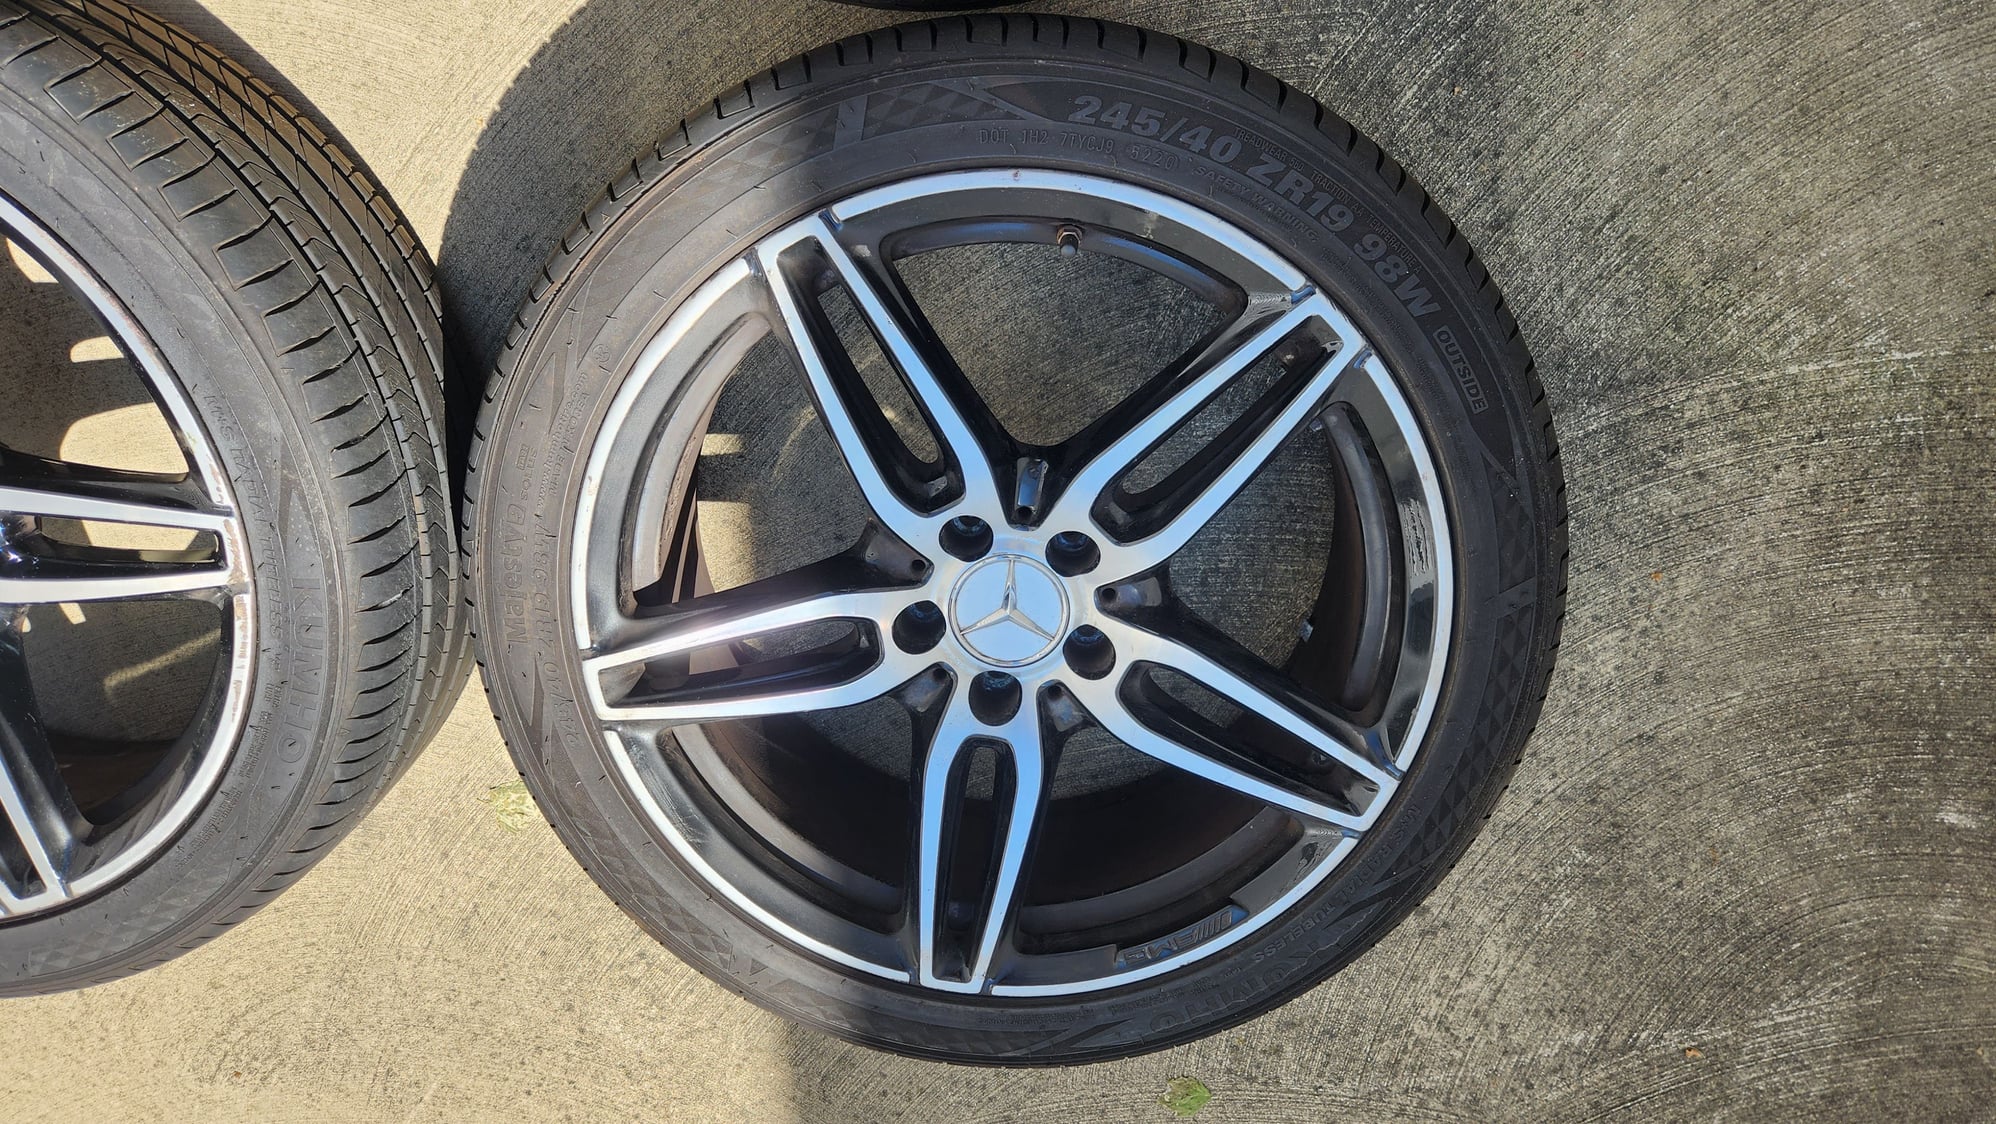 Wheels and Tires/Axles - OEM MB AMG 19" Bi-color wheels with new tires - Used - 2017 to 2024 Mercedes-Benz E-Class - 2019 to 2024 Mercedes-Benz E53 AMG - 2017 to 2018 Mercedes-Benz E43 AMG - Staten Island, NY 10314, United States